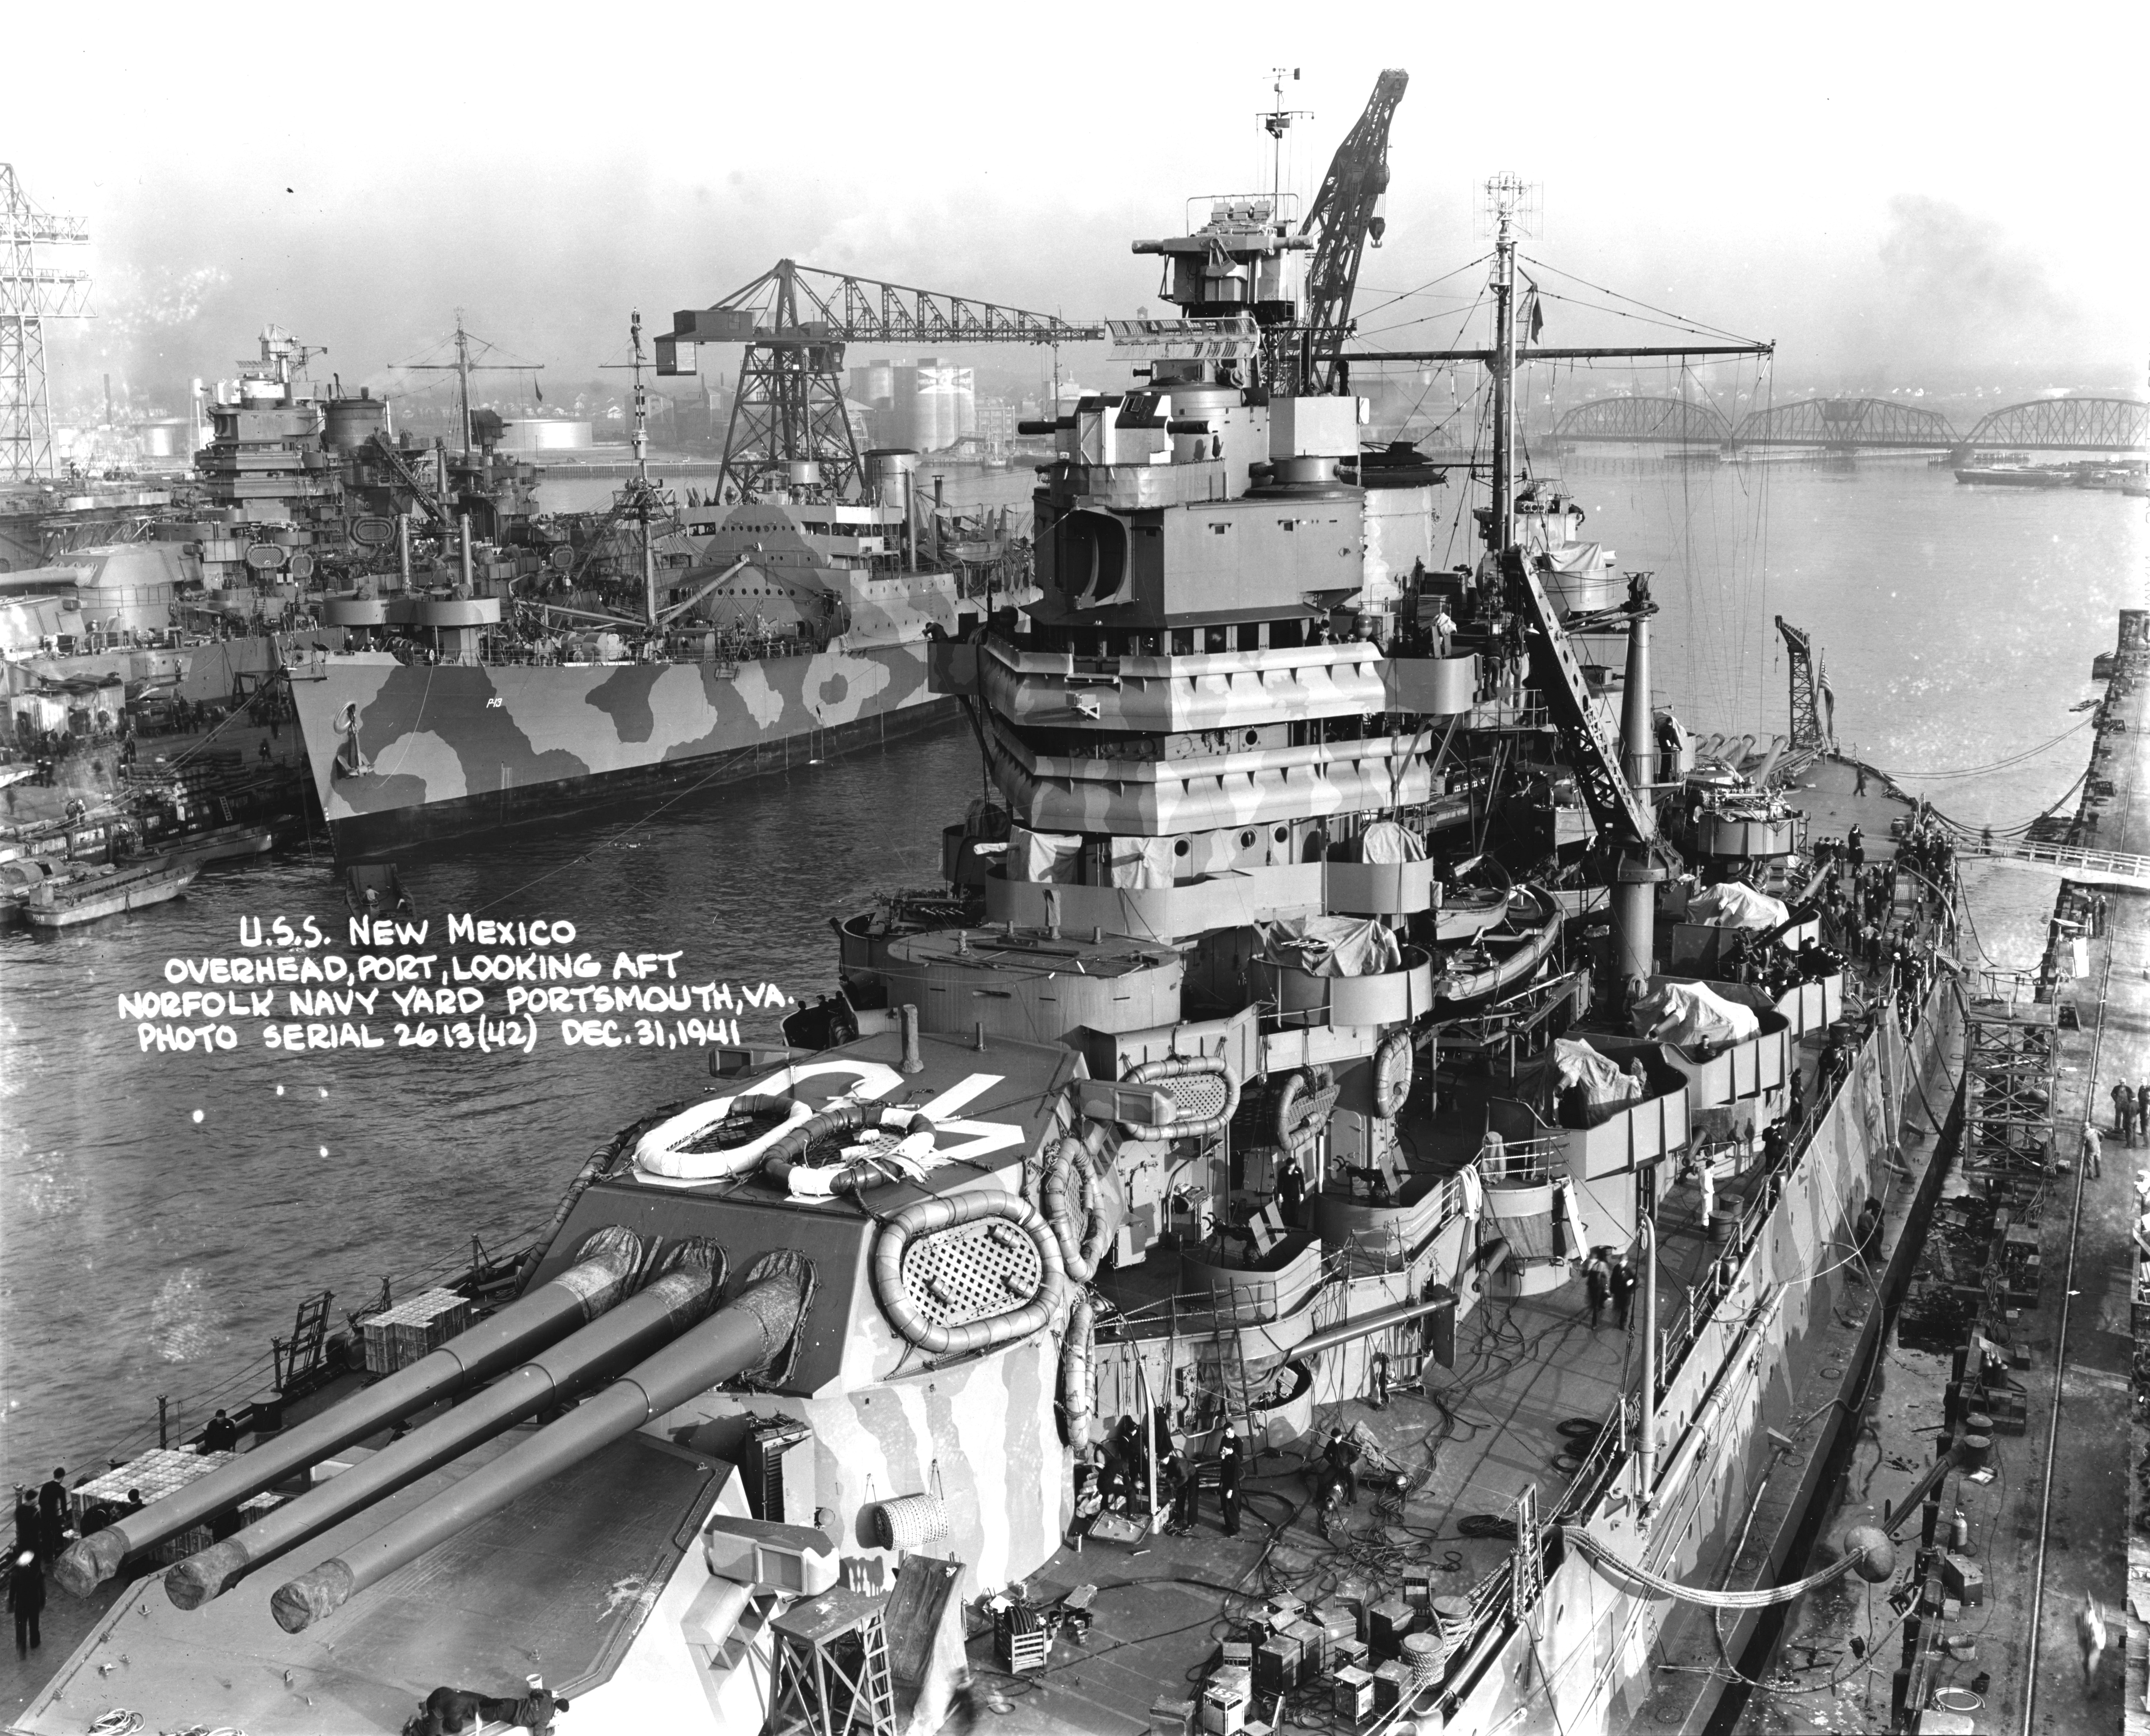 New Mexico at the Norfolk Navy Yard, Portsmouth, Virginia, United States, 31 Dec 1941